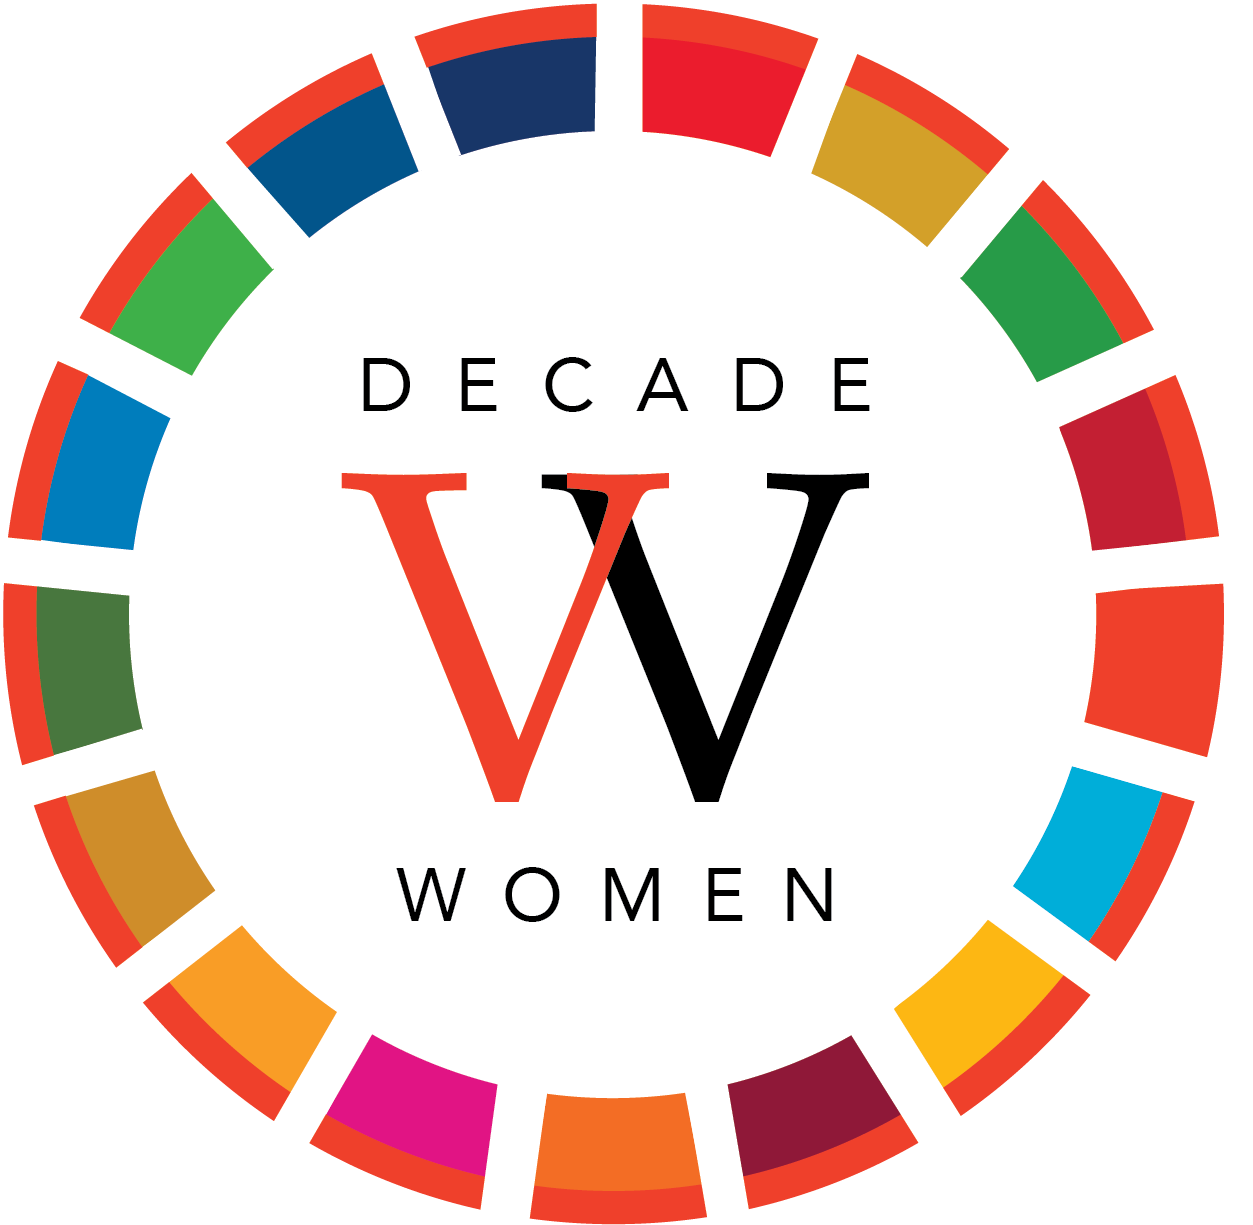 Decade Of Women Announces Partnership With CodeLagos to Train 500,000 Female Developers.